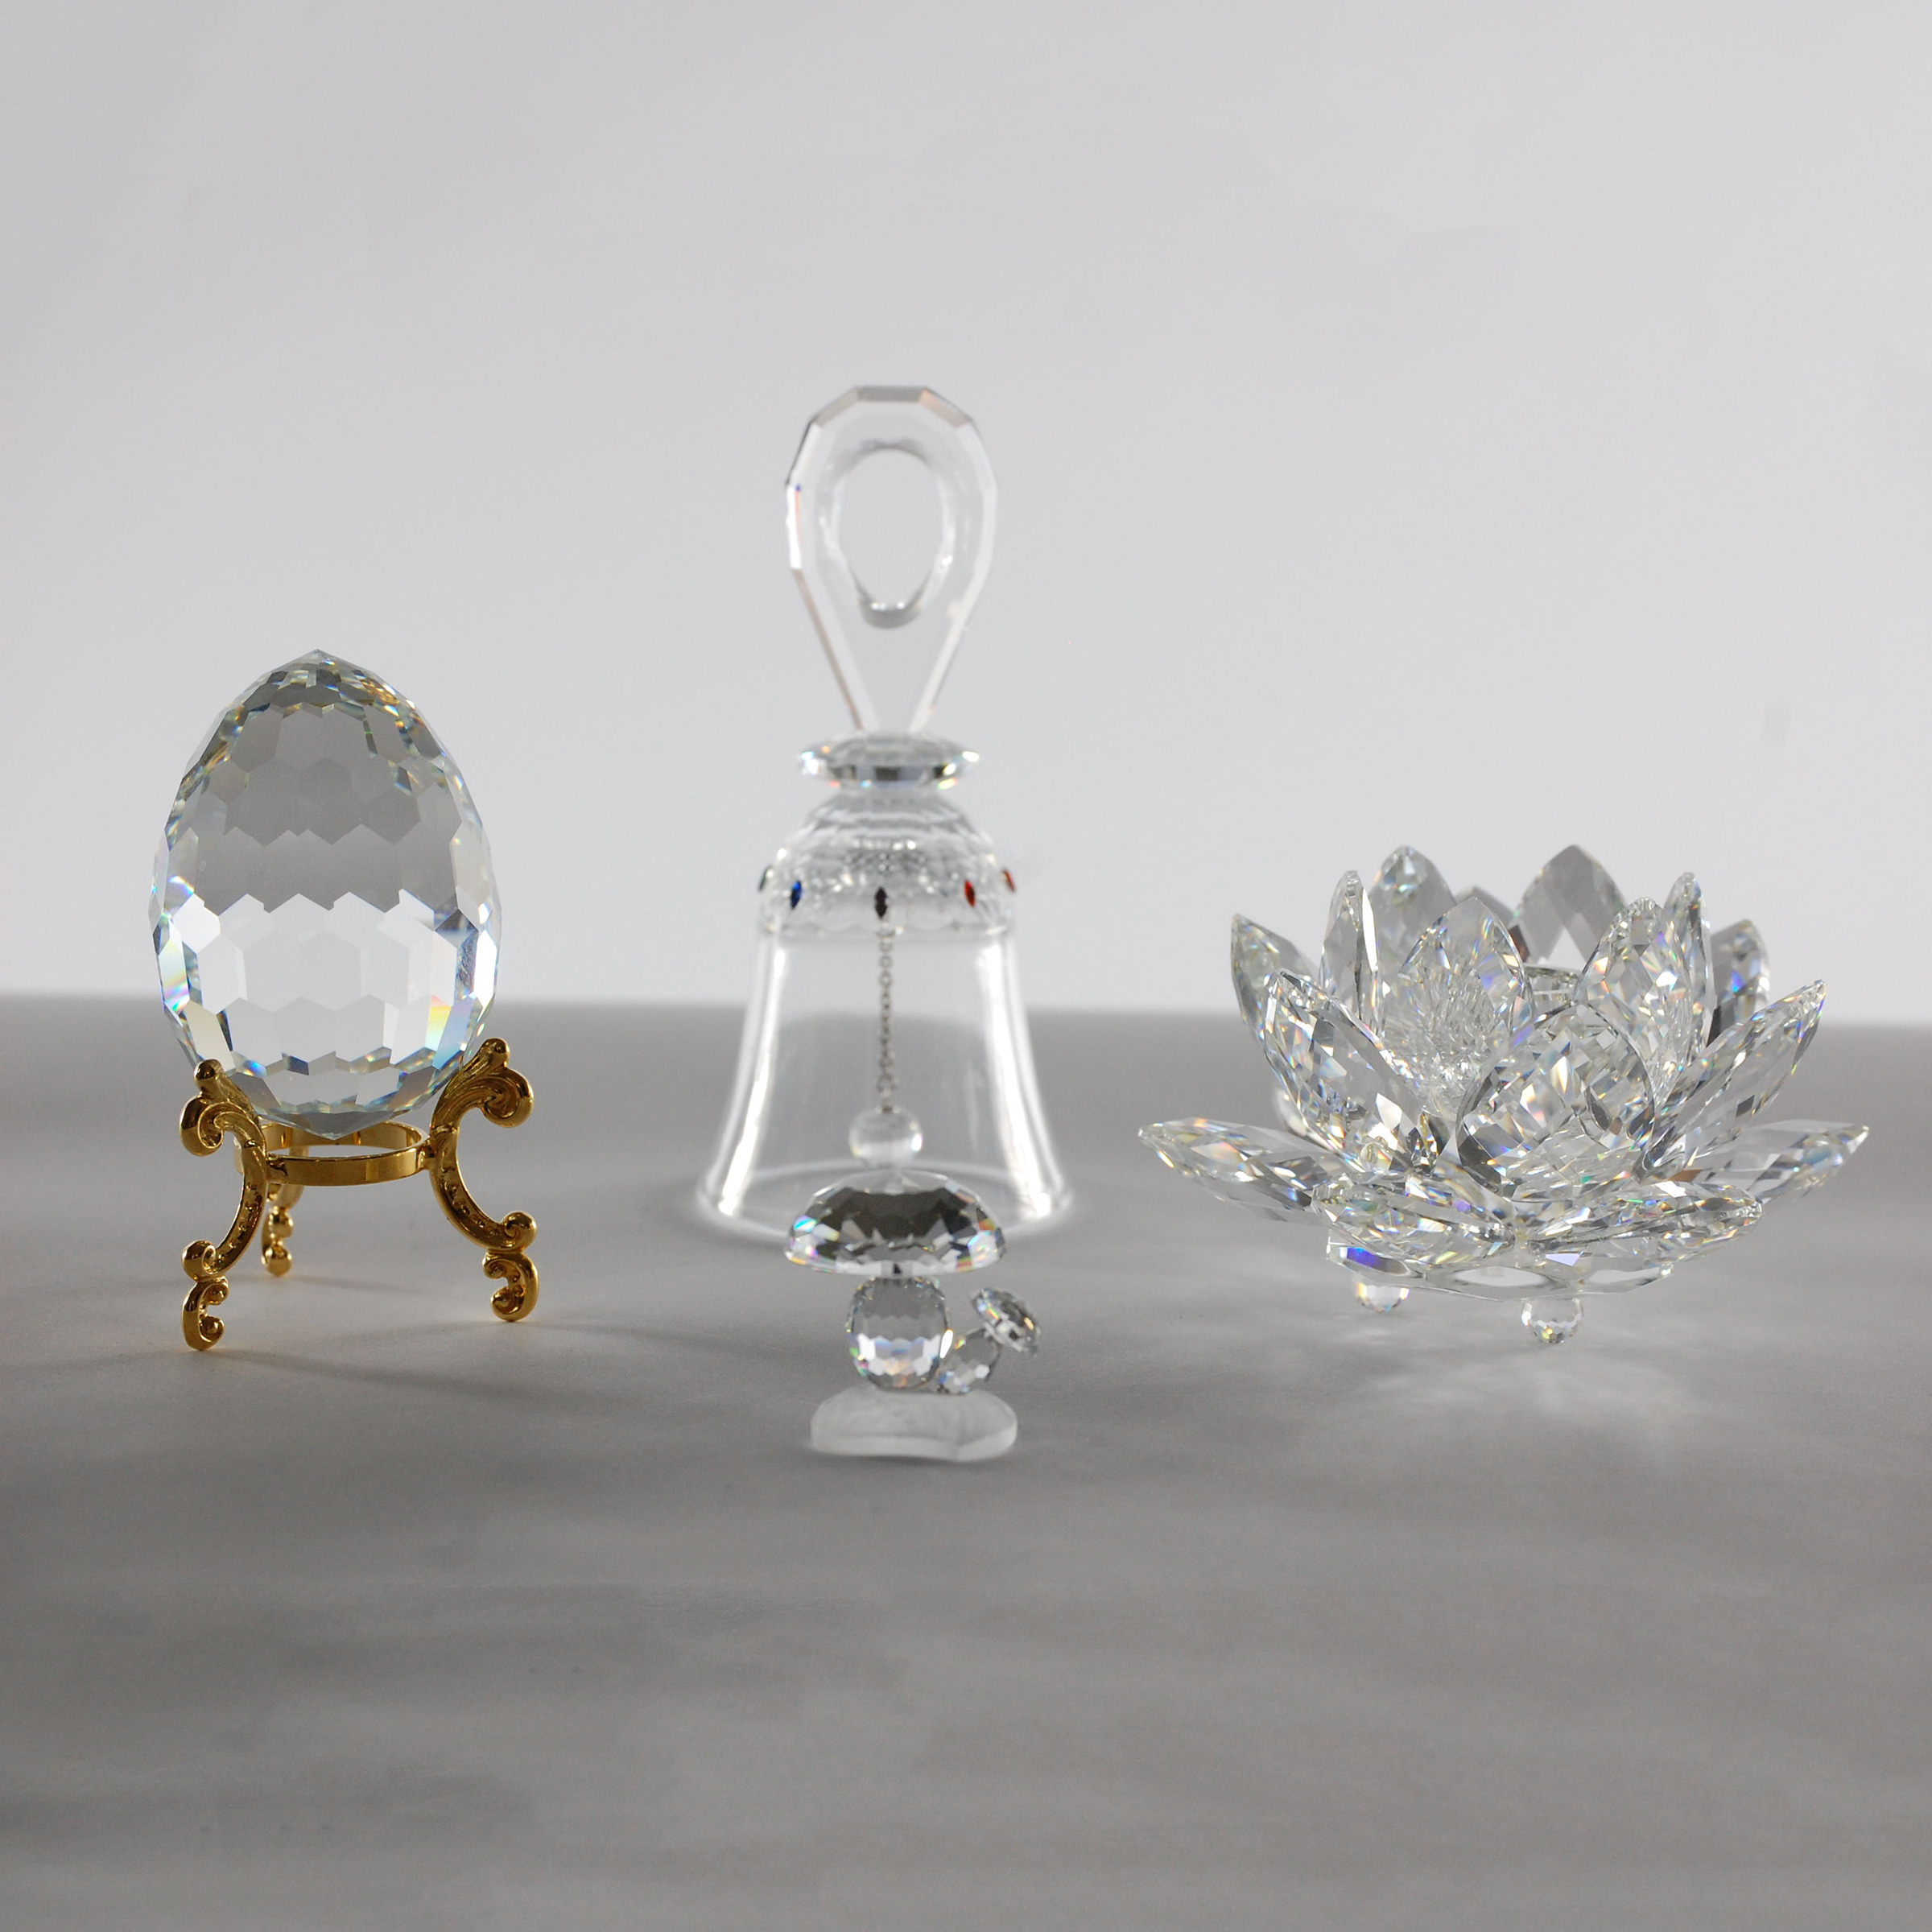 Four Swarovski Crystal Decorative Objects, late 20th/early 21st century